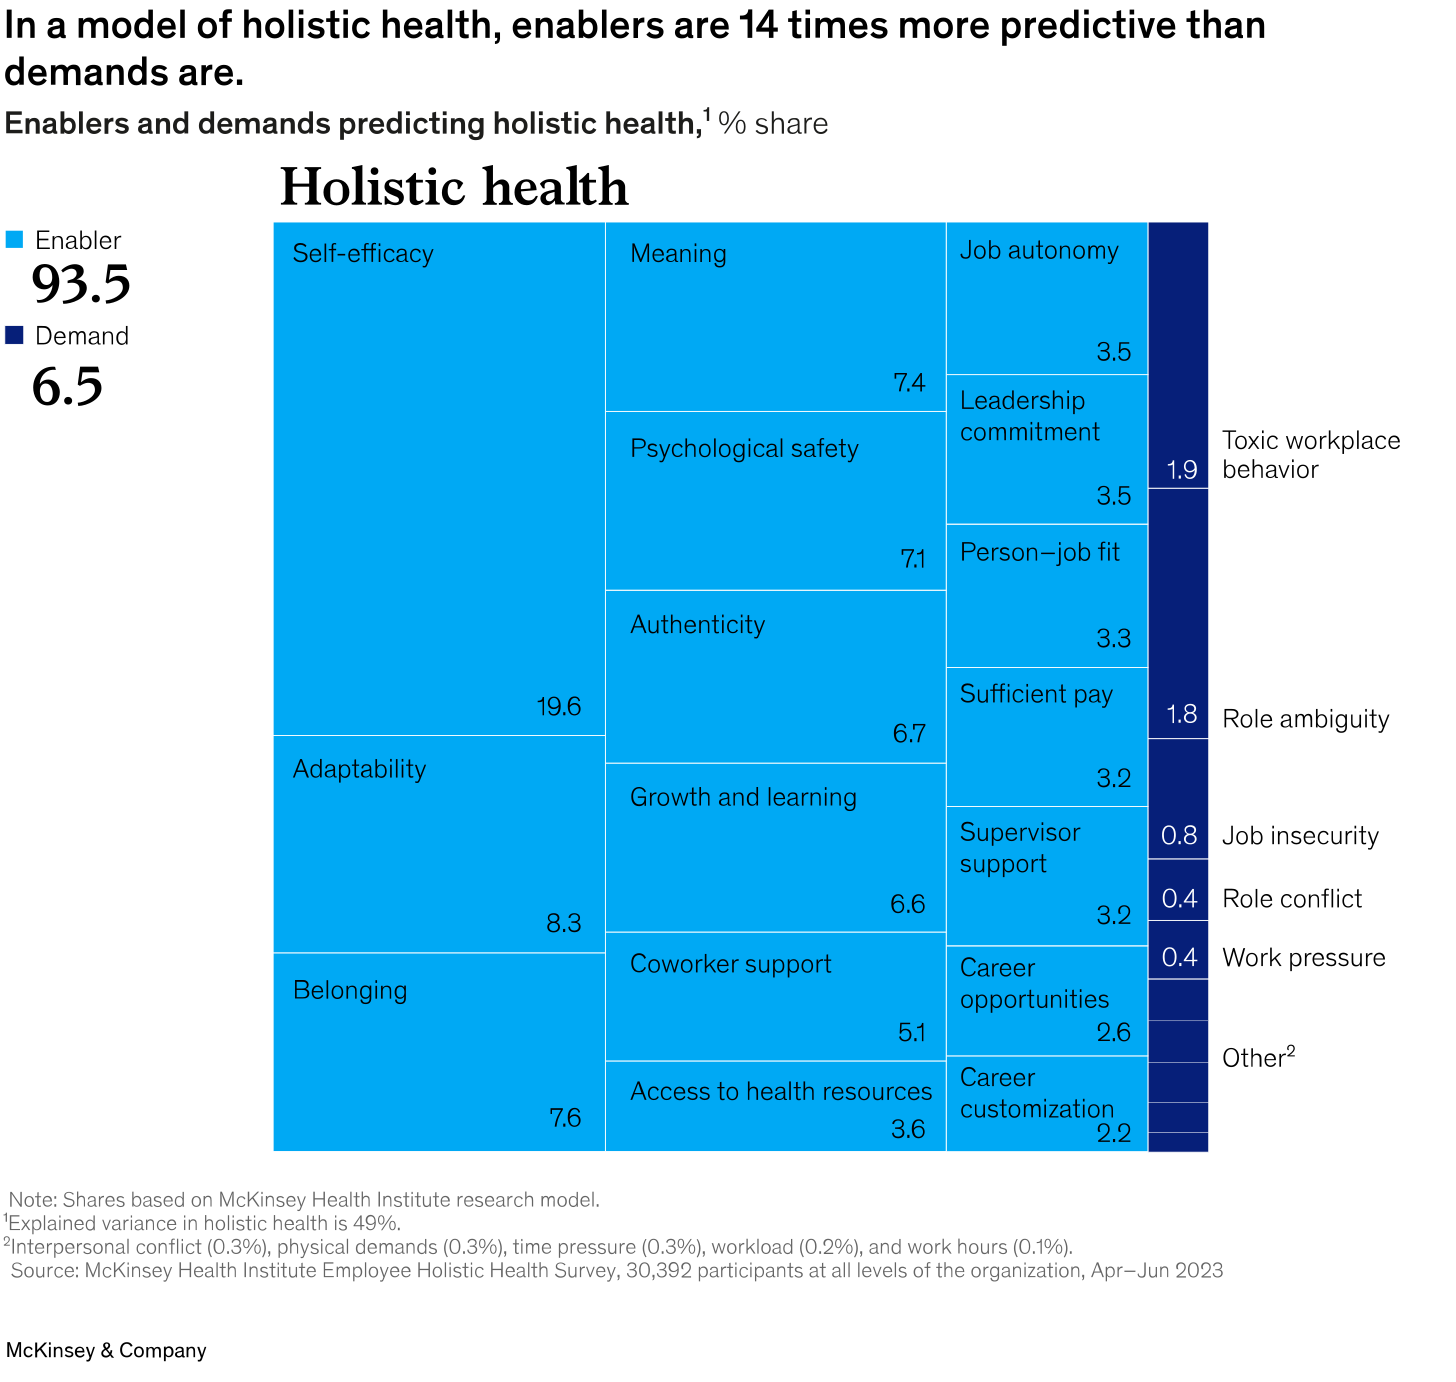 In a model of holistic health, enablers are 14 times more predictive than demands are.